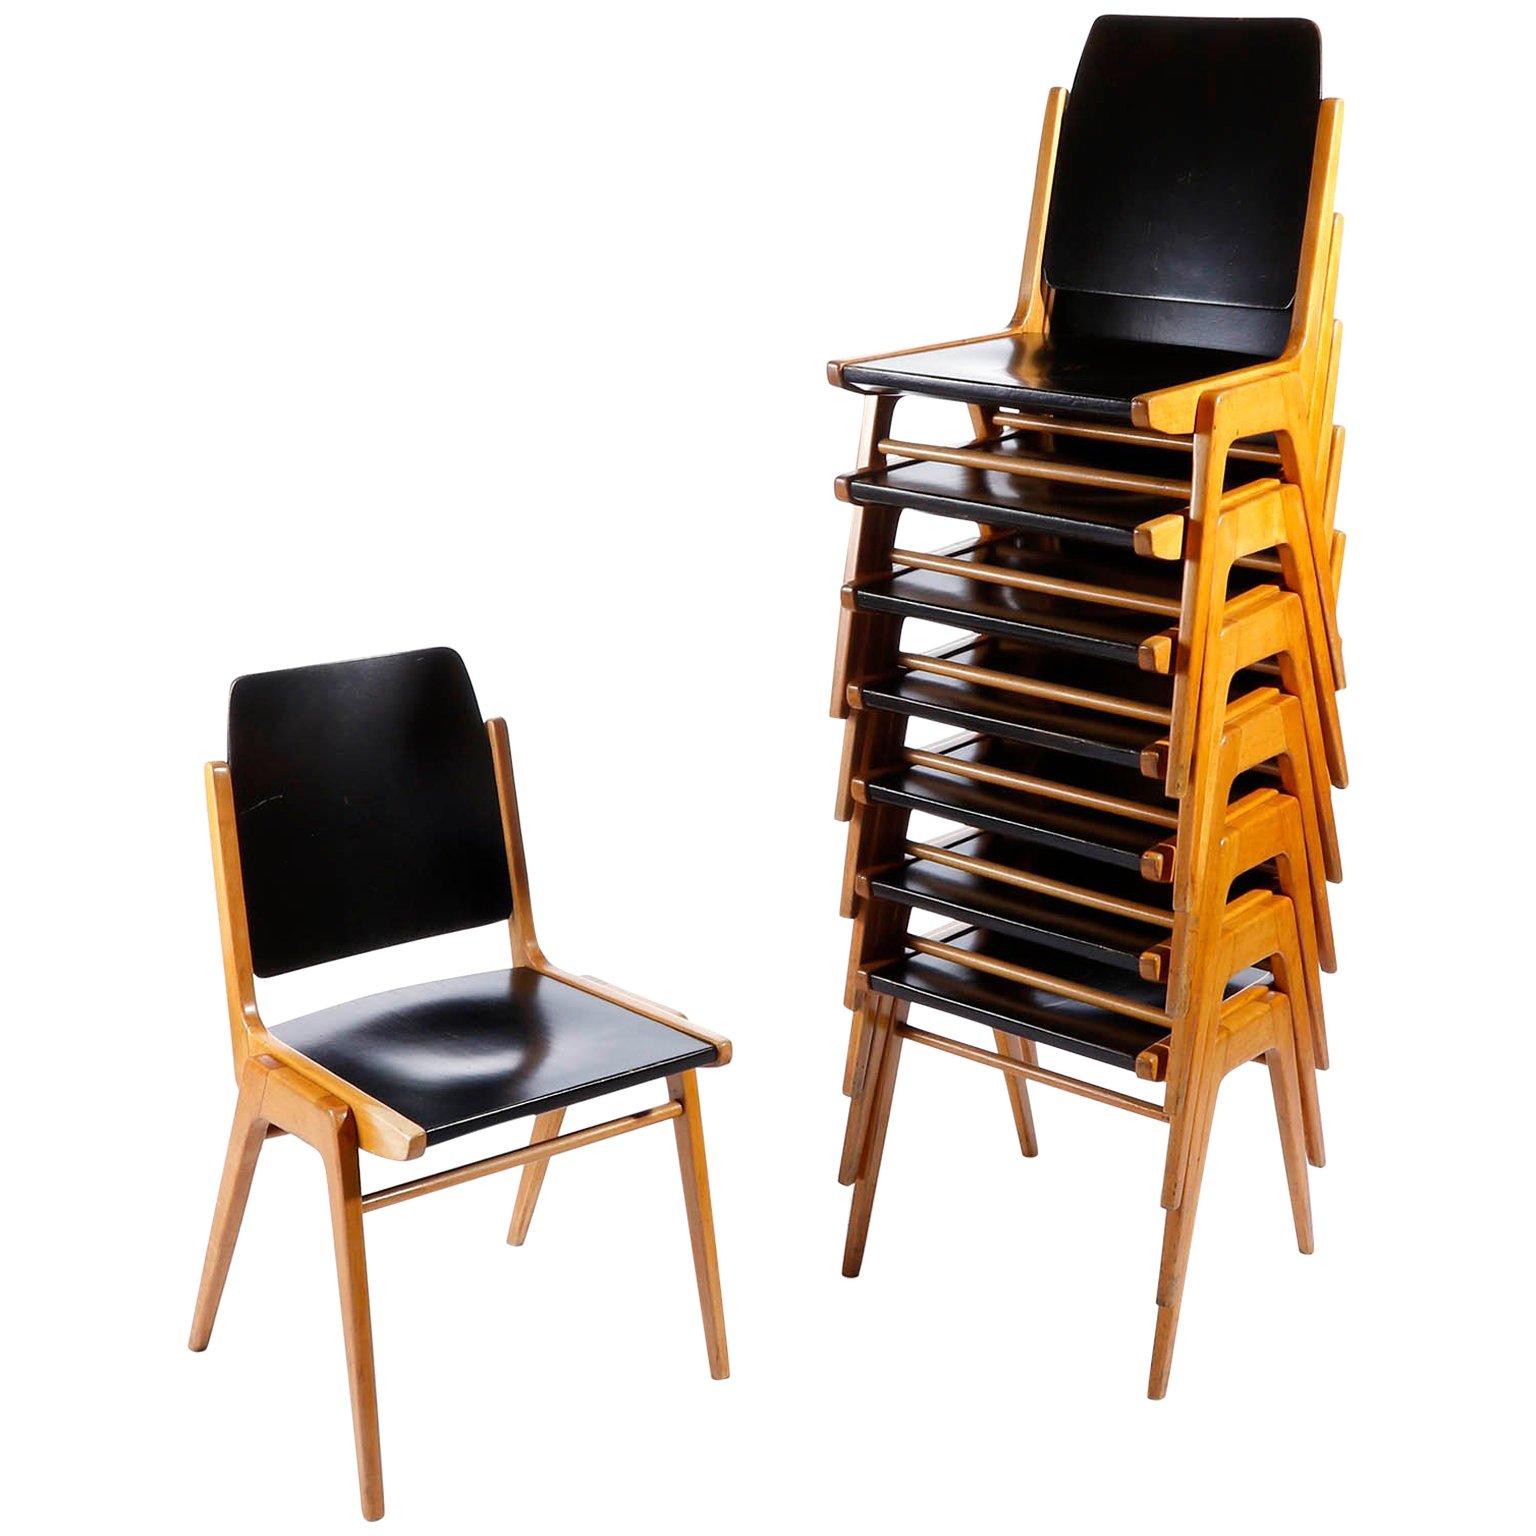 A set of eight bicolored stacking chairs designed by Austrian architect Franz Schuster for the Stadtpark-Forum Graz in 1959. The offered chairs were manufactured by Wiesner-Hager in Mid-Century, circa 1960 (late 1950s or early 1960s).
A very simple